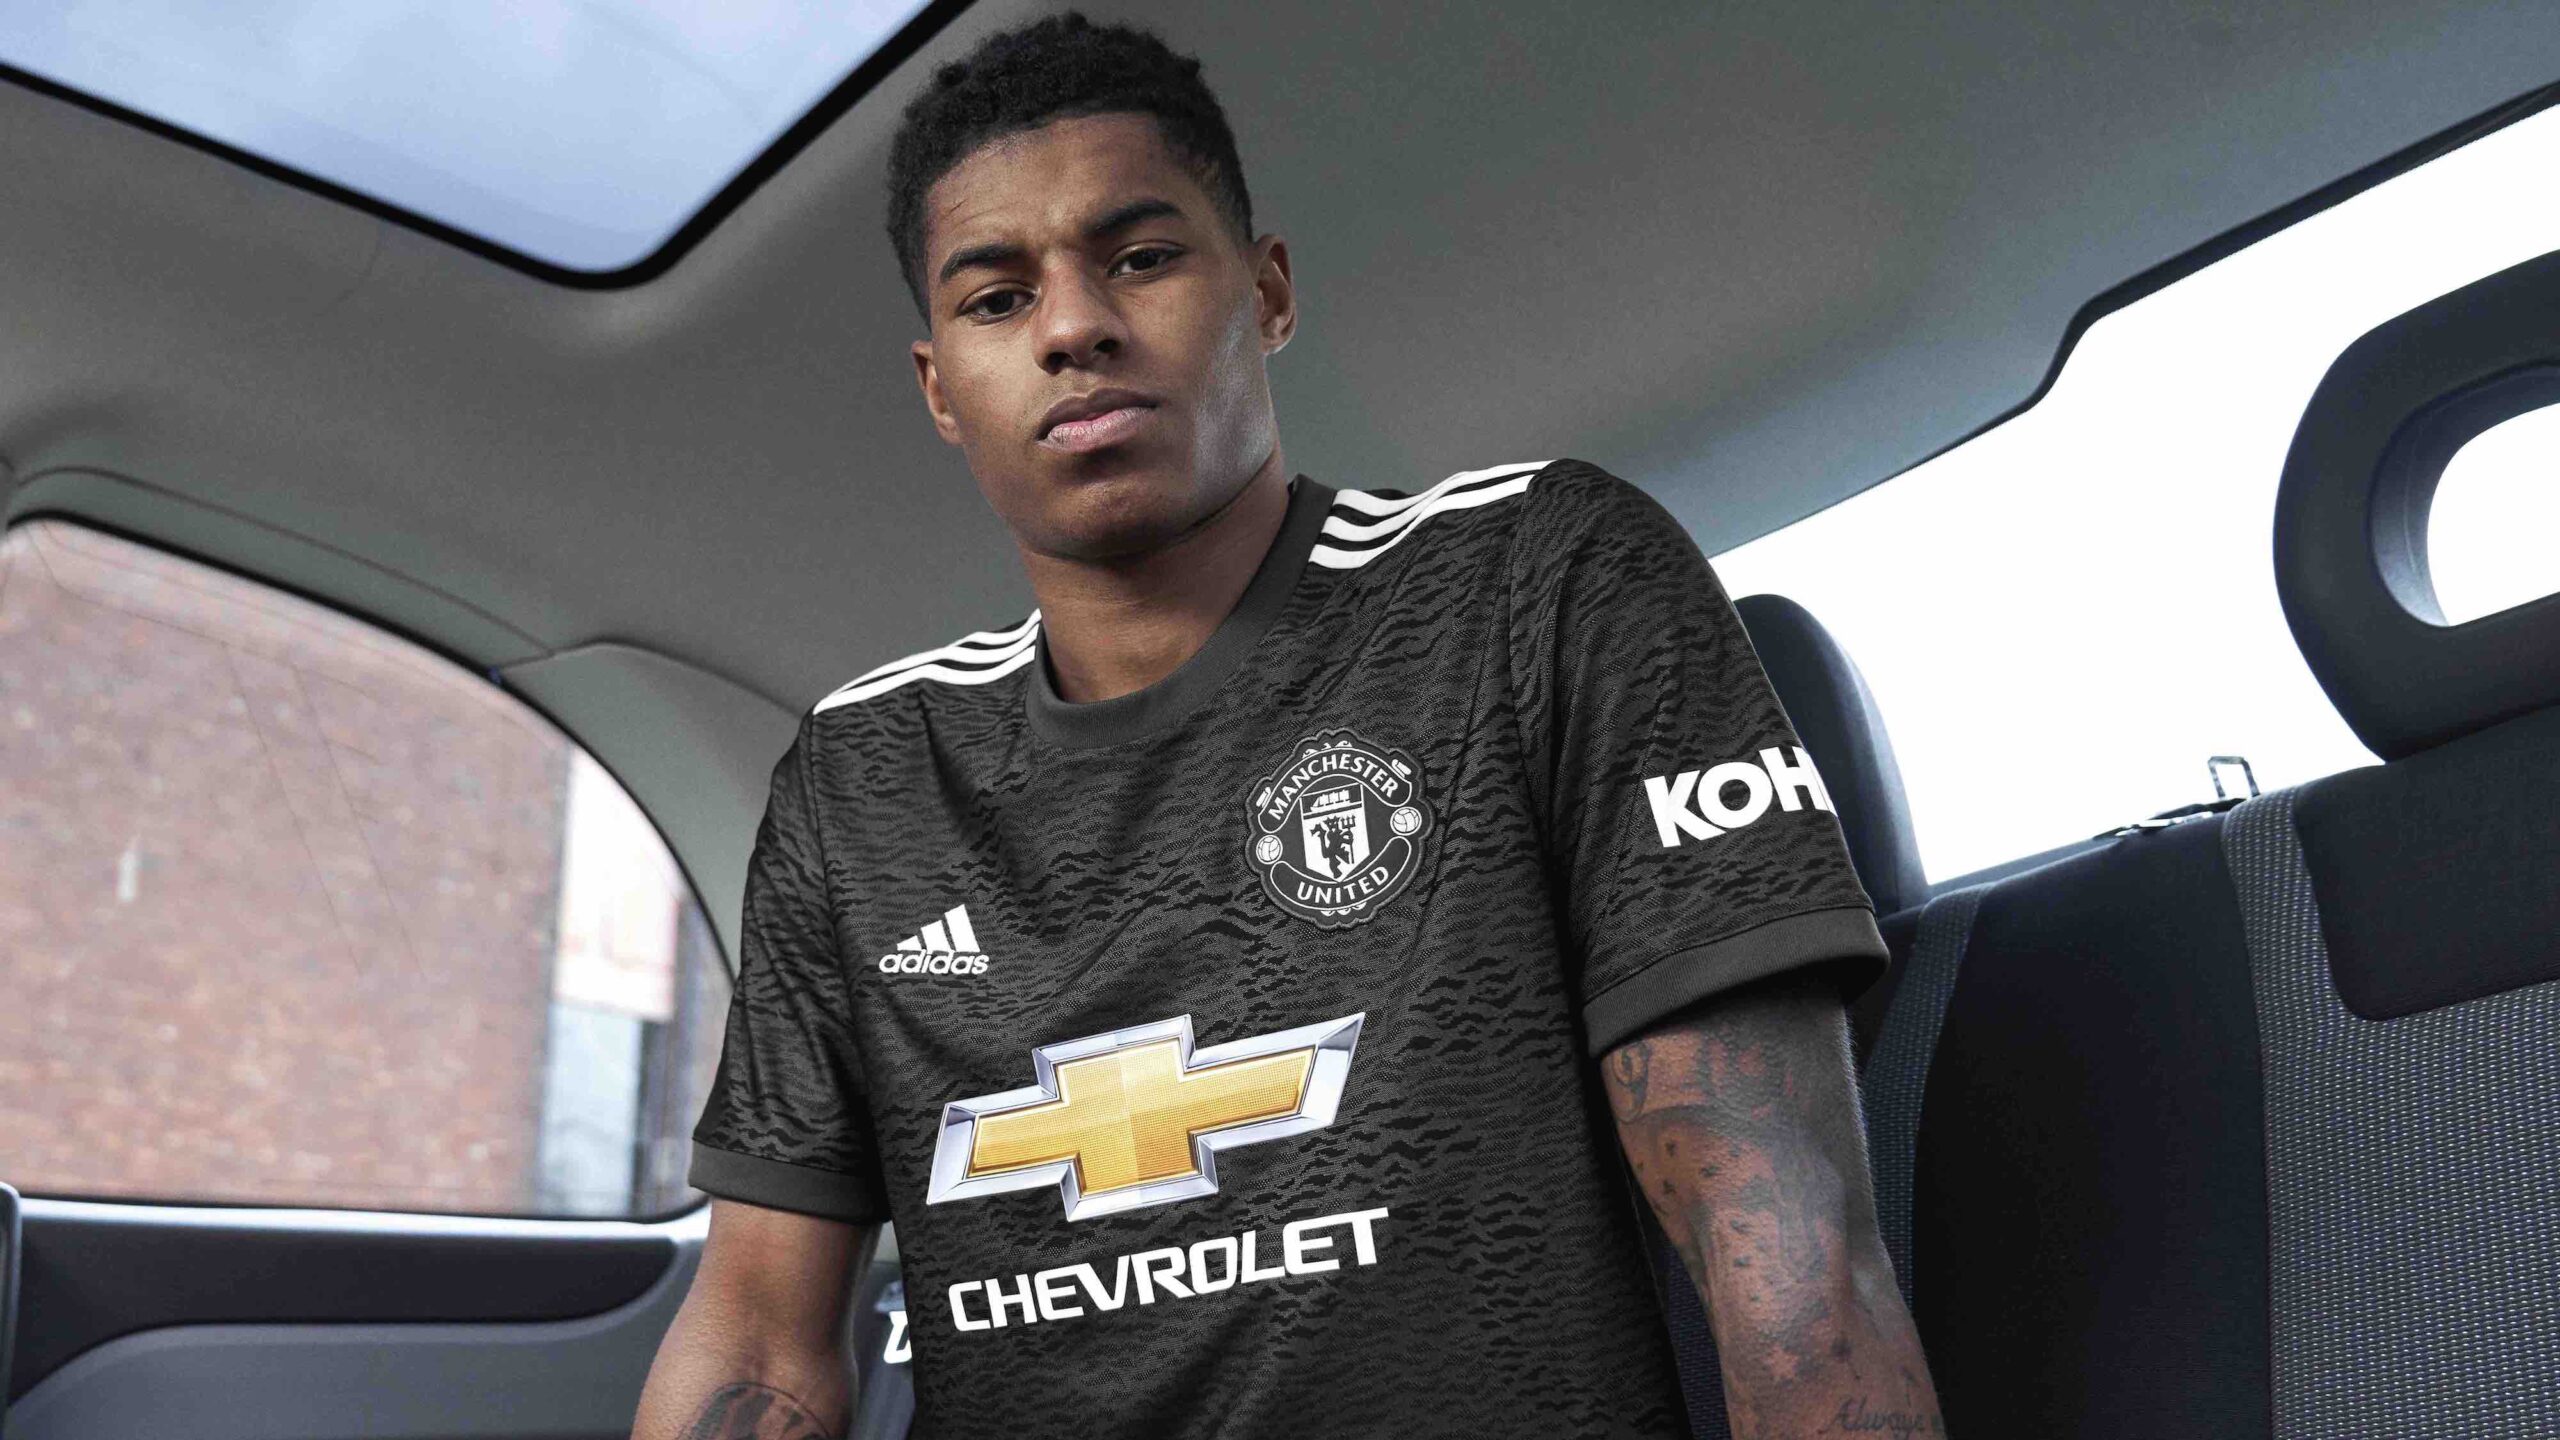 Manchester united 202021 away jersey revealed scaled